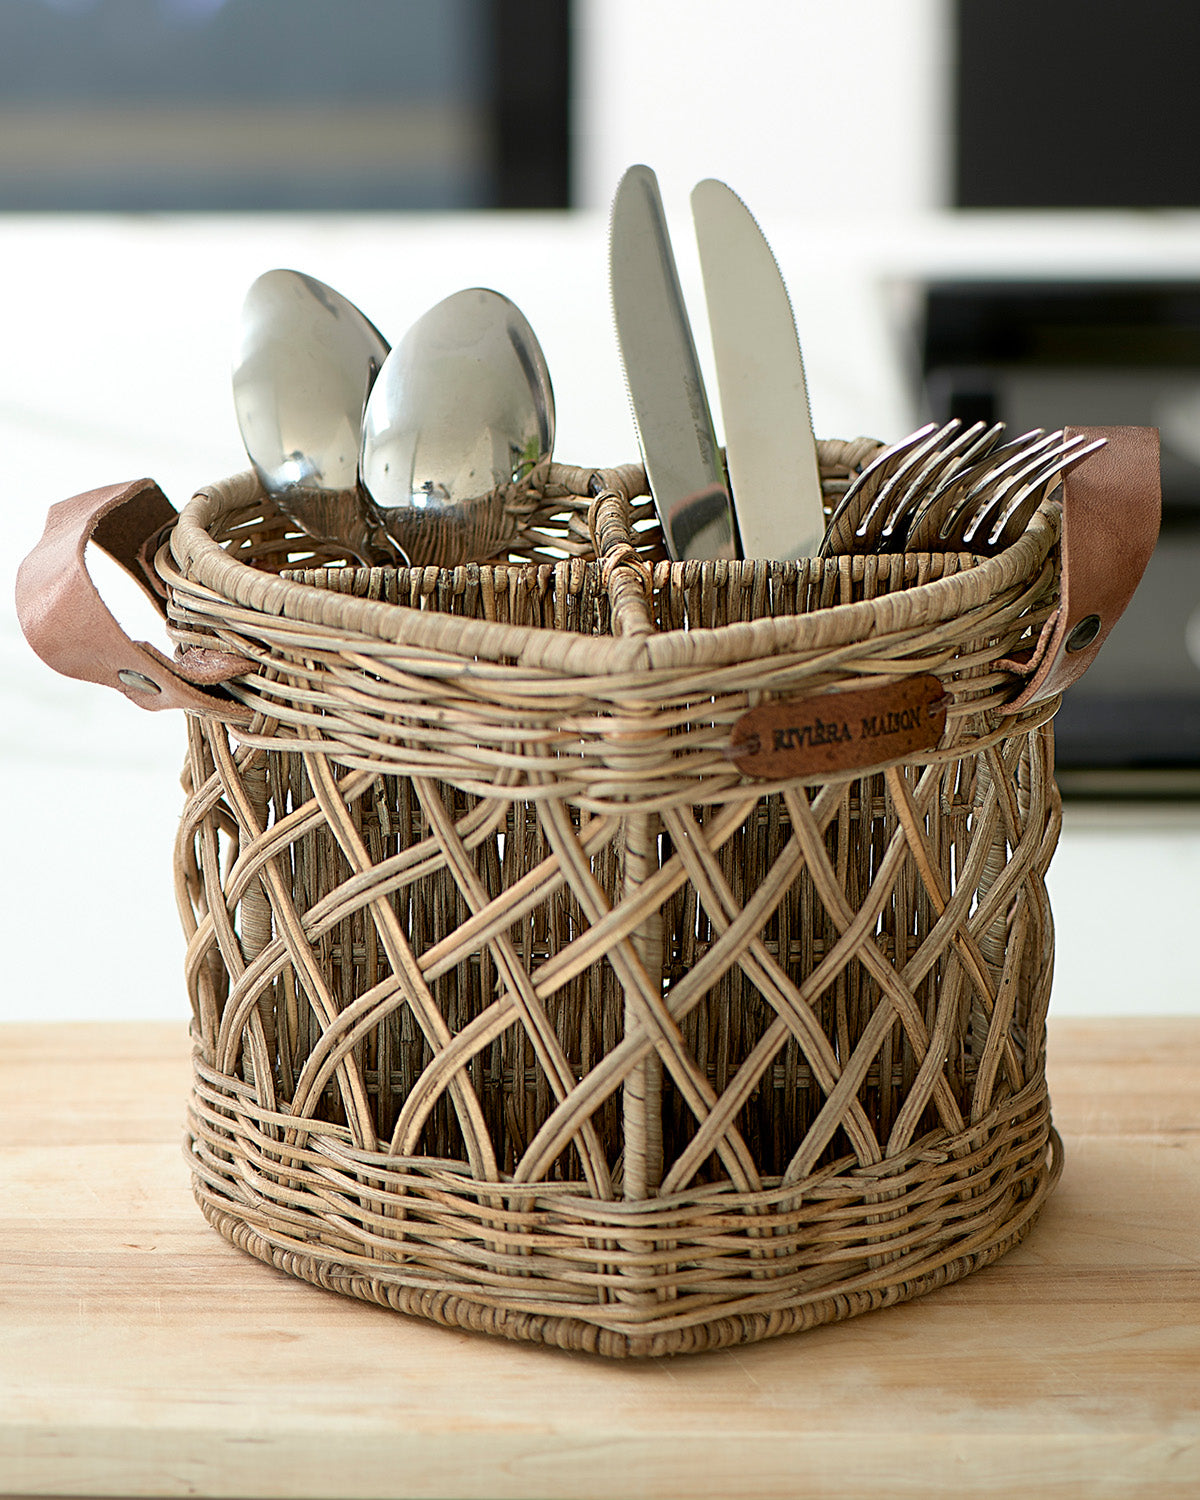 UTENSILS HOLDER HEART shape made from openwork rattan with leather handles by Riviera Maison